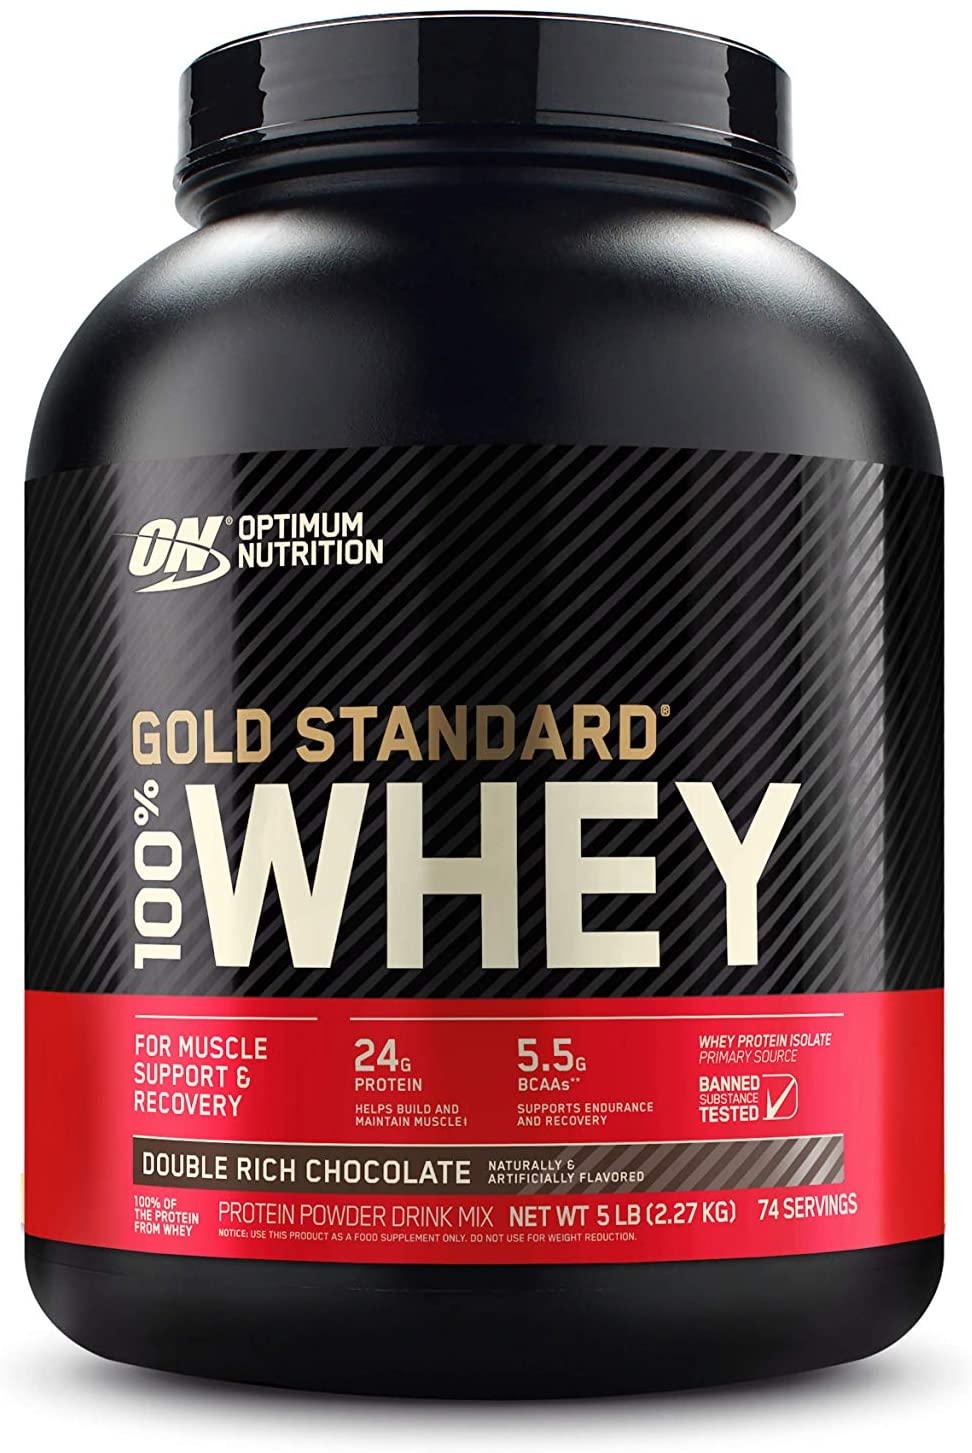 Amazon.com: Optimum Nutrition Gold Standard 100% Whey Protein Powder, Double Rich Chocolate, 5 Pound (Packaging May Vary): Health & Personal Care $35.19 (2 for $82.10 w/5% S&S)